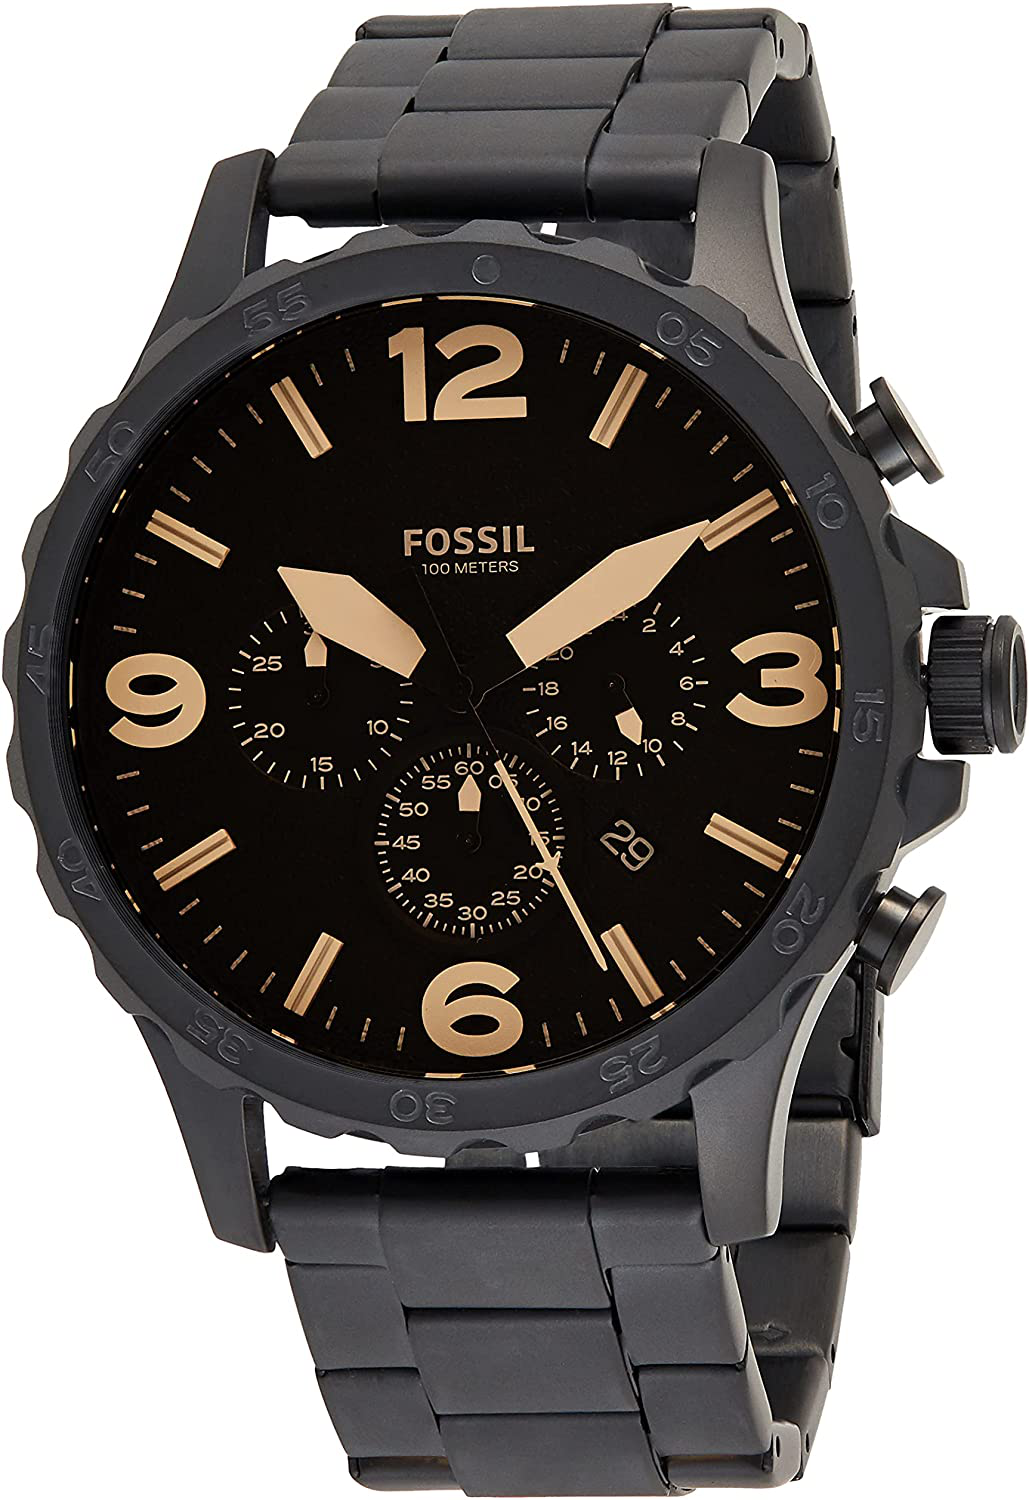 Fossil Men's Nate Black Stainless Steel Quartz Chronograph Brown Dial Watch